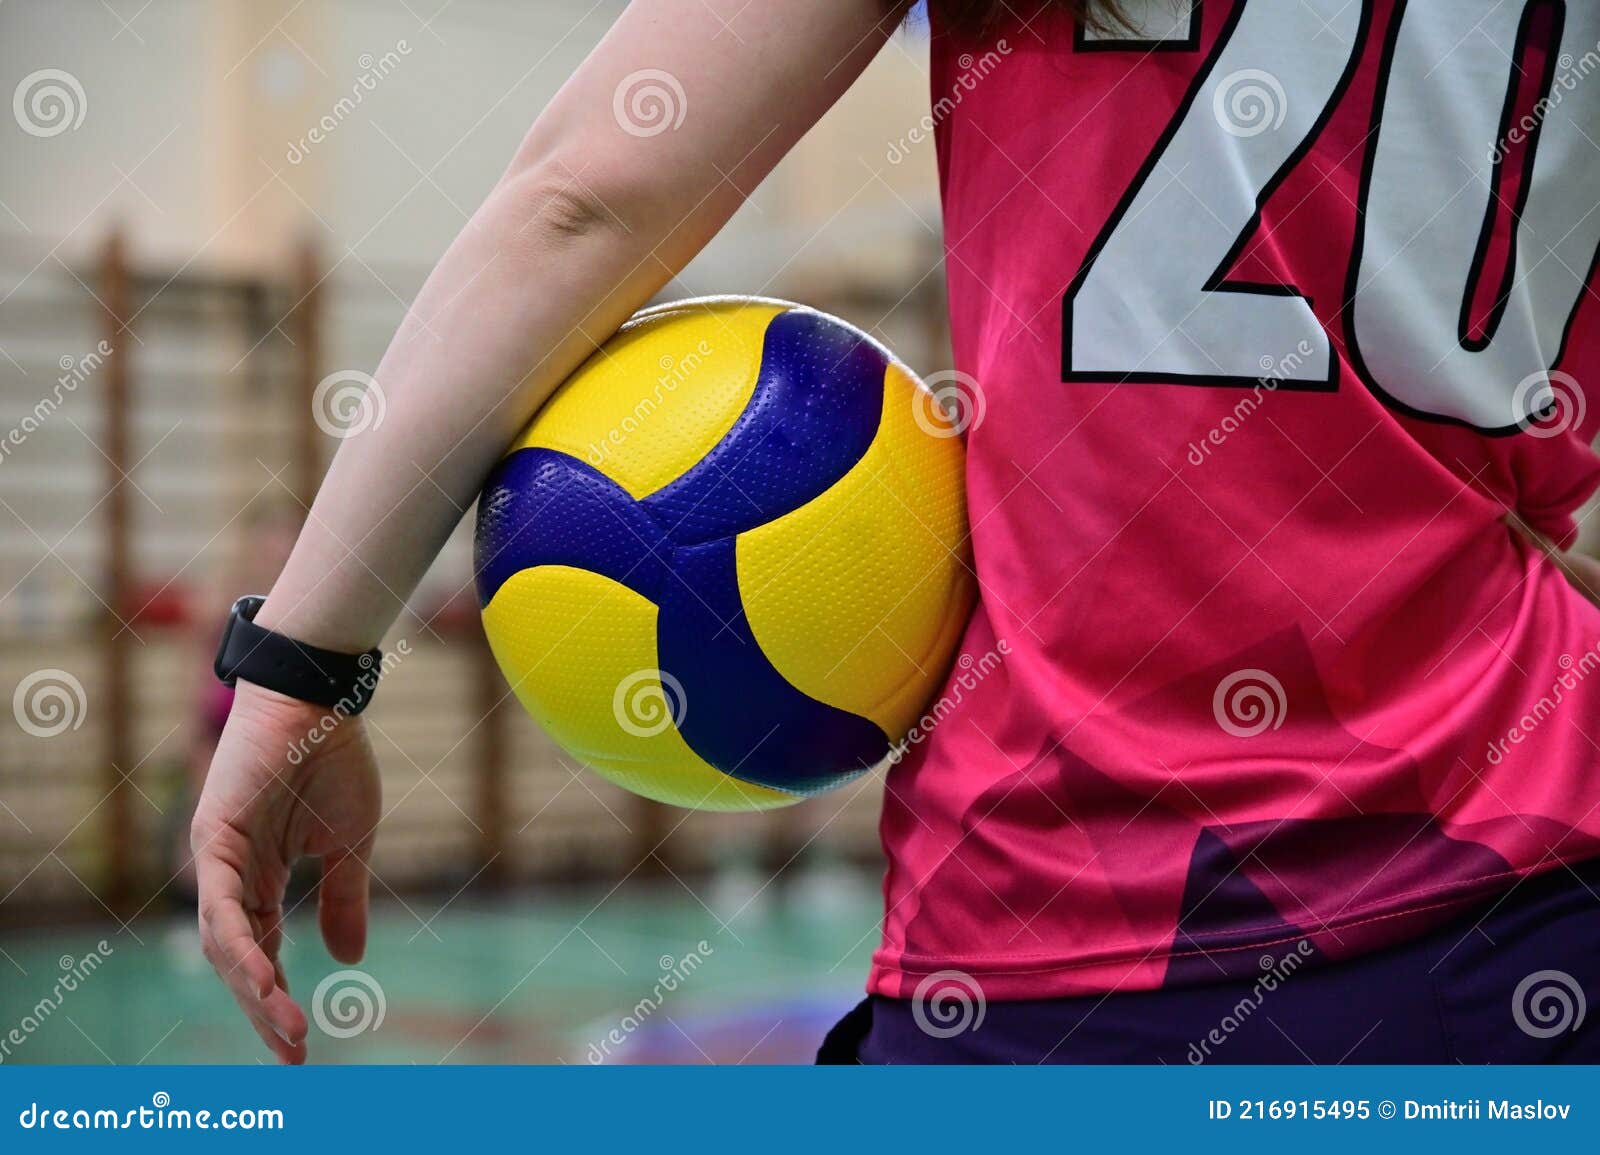 A Volleyball Player Stands with Her Back To the Camera Holding a ...